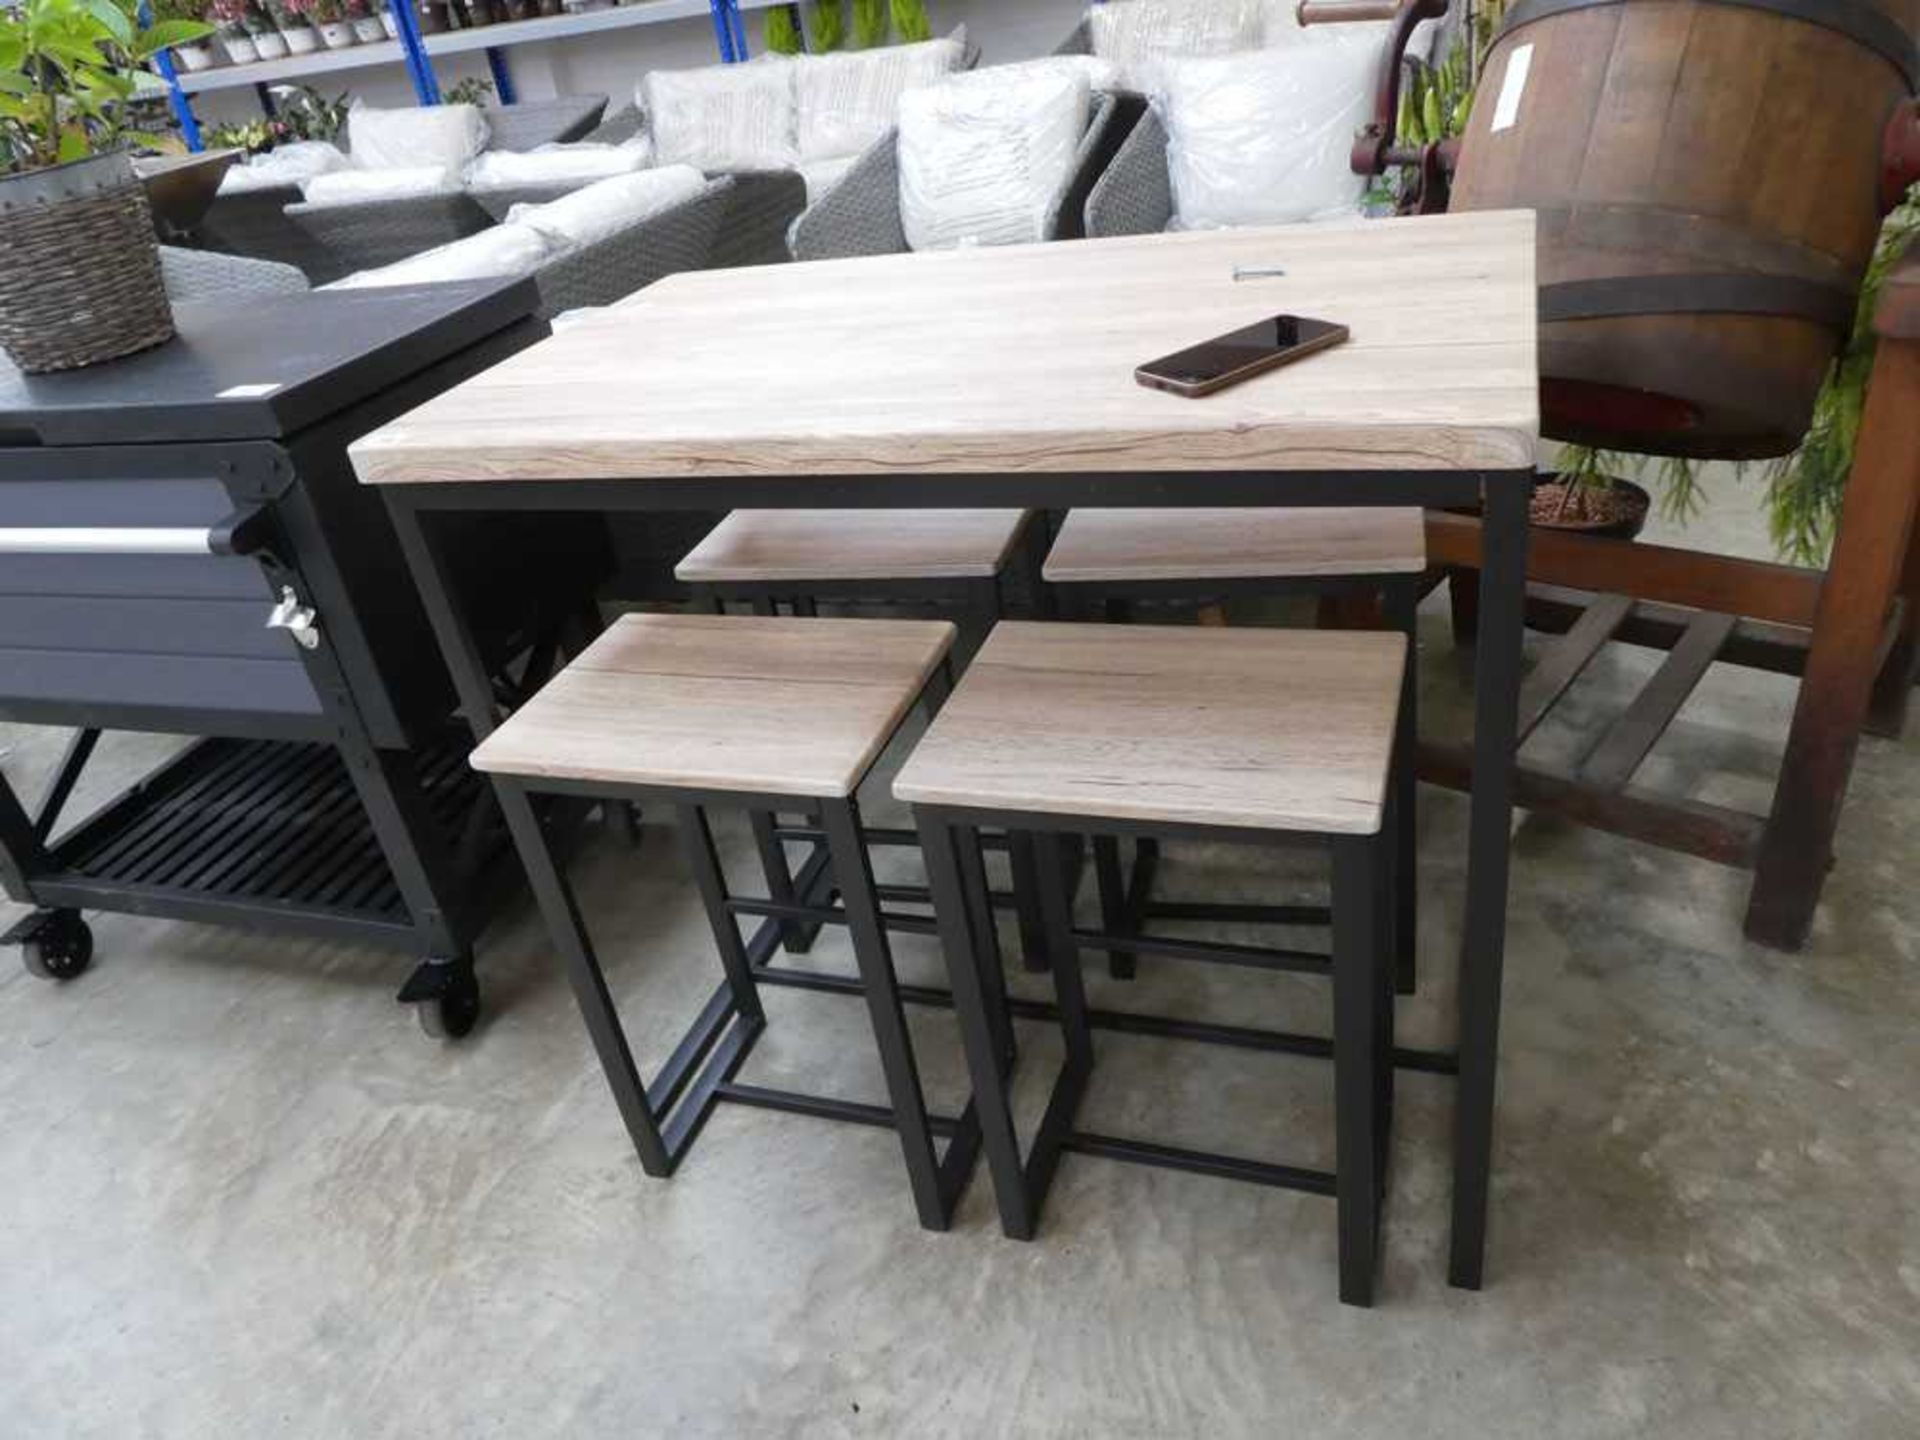 Wood effect 5 piece outdoor seating set comprising table and 4 stools